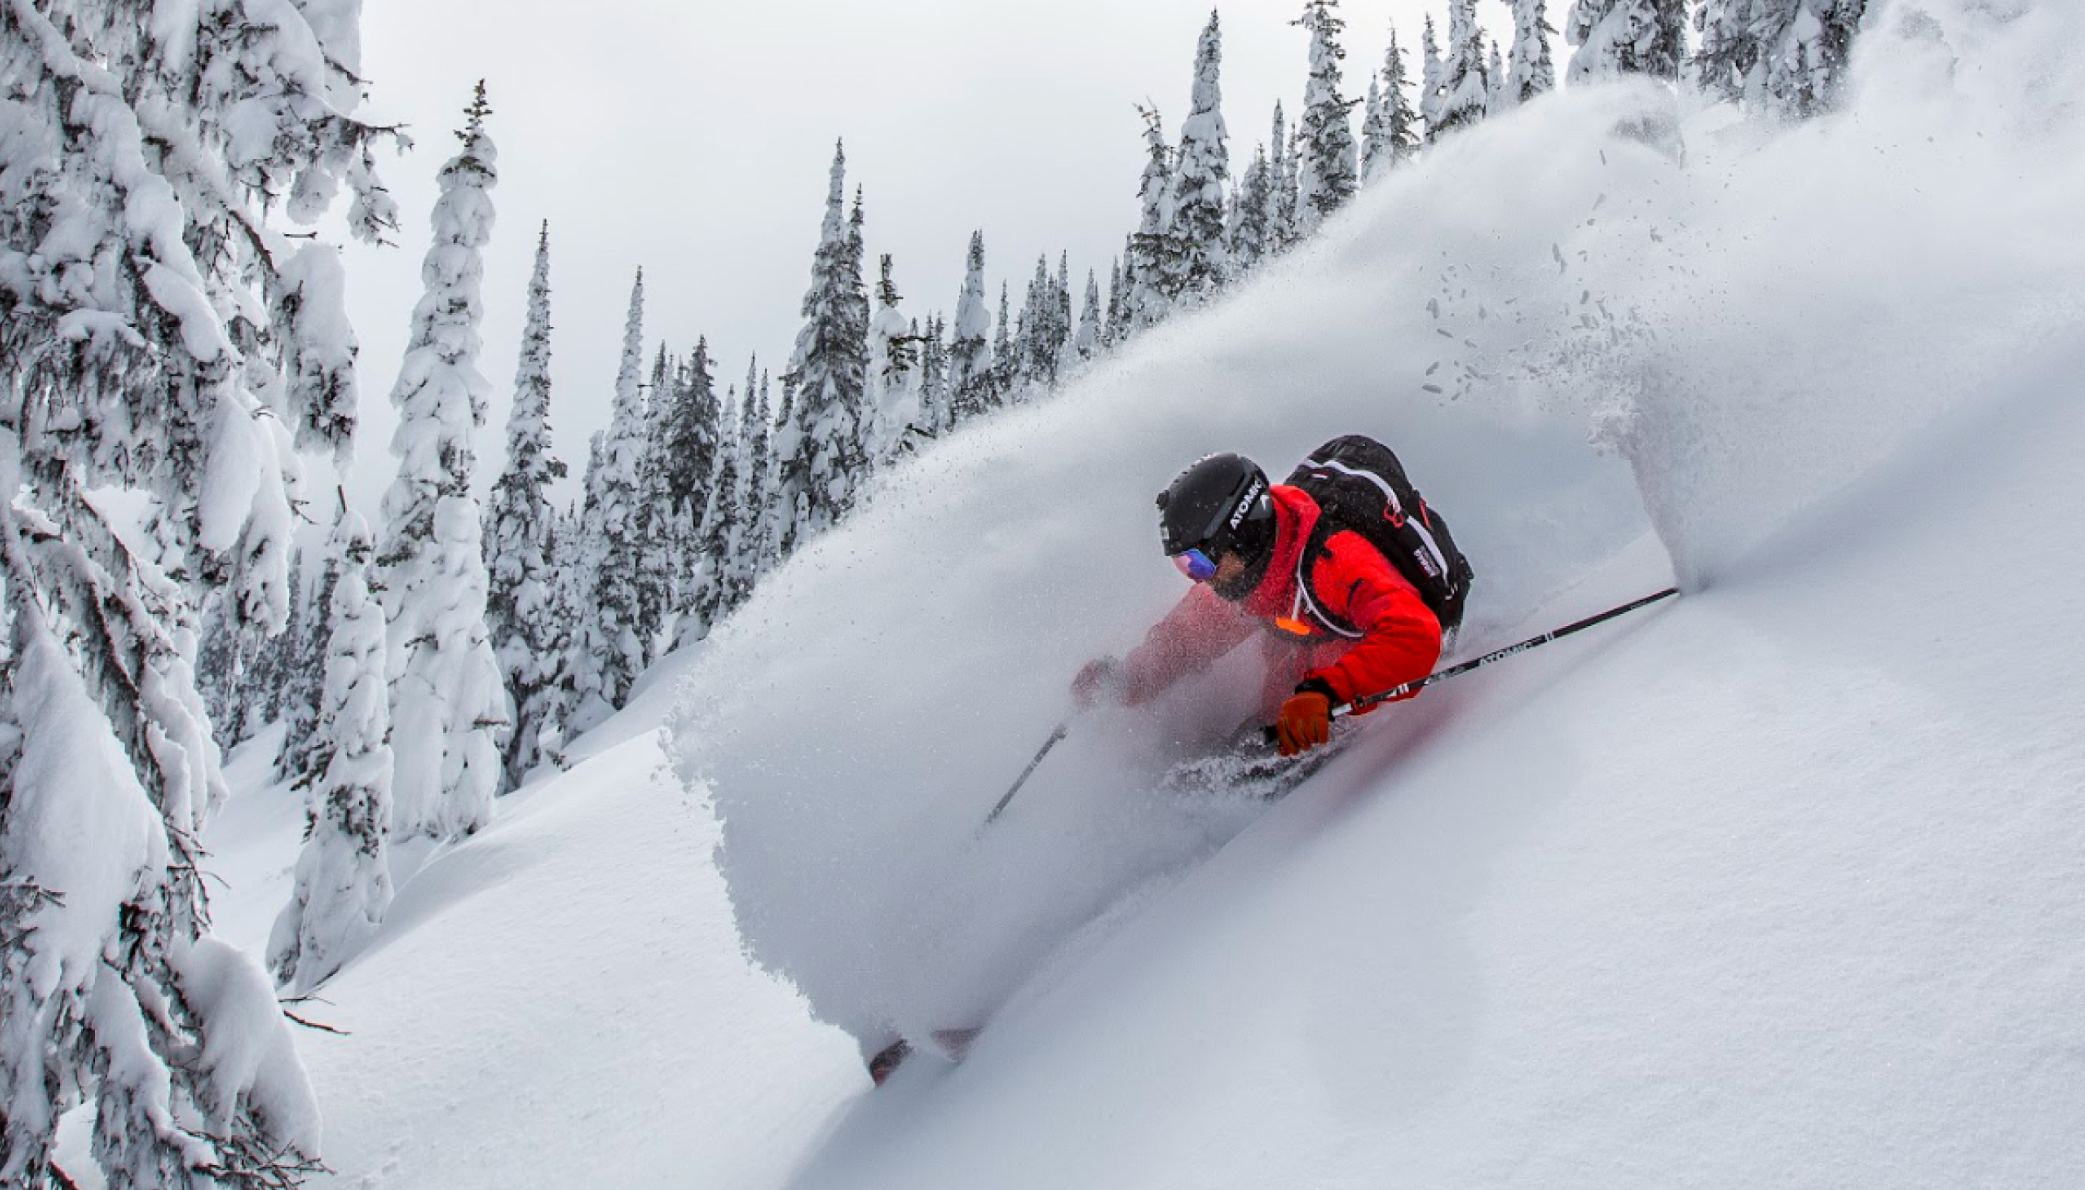 Some of the best powder skiing in the world at Stellar Heliskiing.